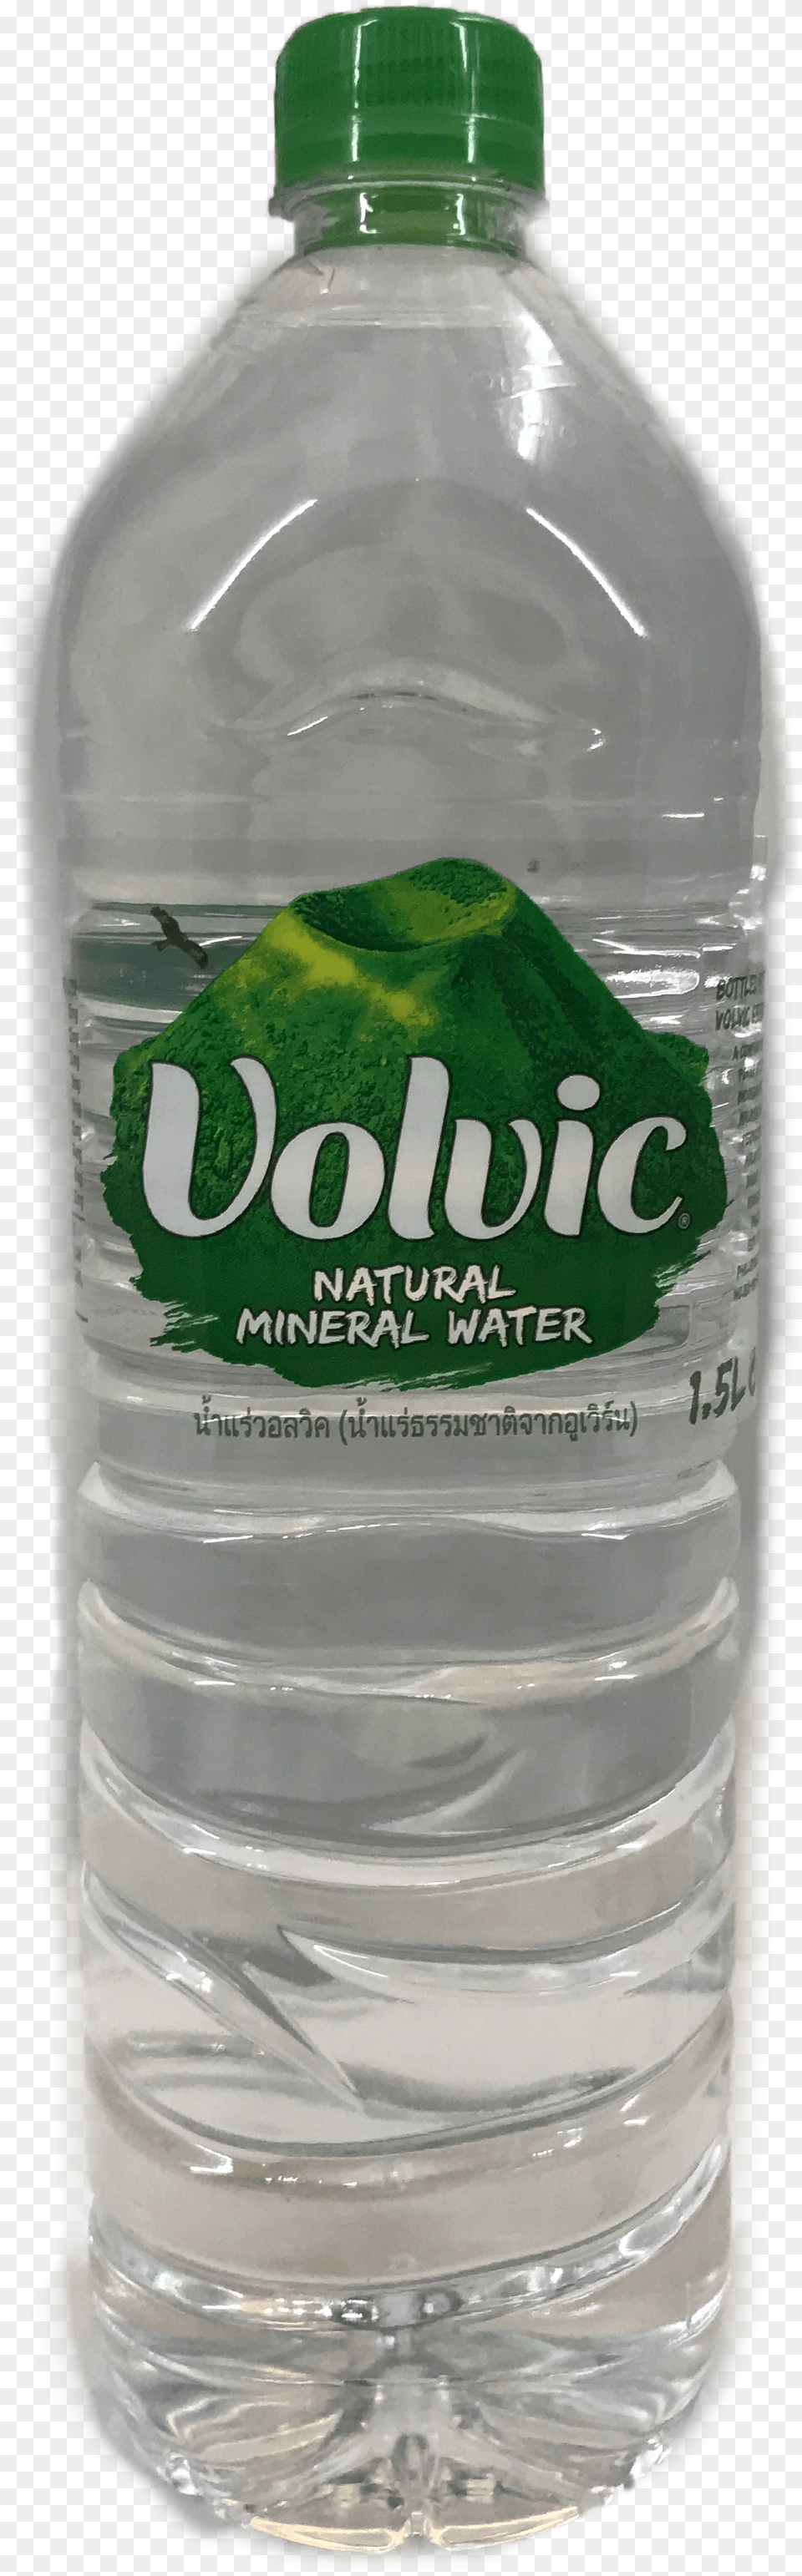 Volvic Mineral Water Water Bottle, Water Bottle, Beverage, Mineral Water, Tape Free Png